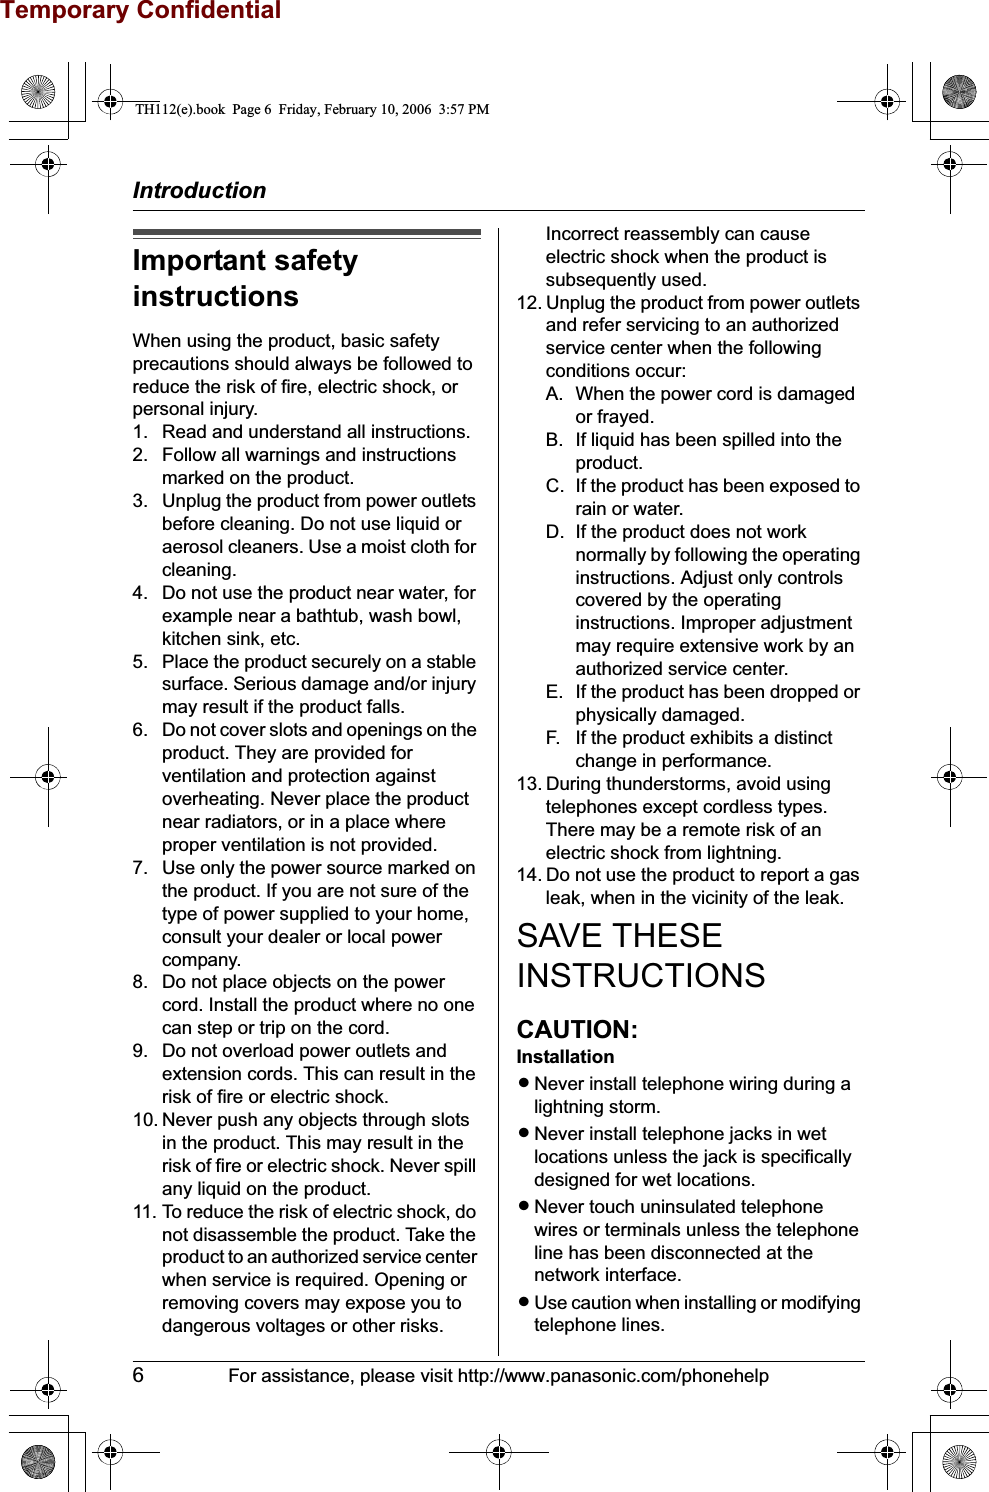 Temporary ConfidentialIntroduction6For assistance, please visit http://www.panasonic.com/phonehelpImportant safety instructionsWhen using the product, basic safety precautions should always be followed to reduce the risk of fire, electric shock, or personal injury.1. Read and understand all instructions.2. Follow all warnings and instructions marked on the product.3. Unplug the product from power outlets before cleaning. Do not use liquid or aerosol cleaners. Use a moist cloth for cleaning.4. Do not use the product near water, for example near a bathtub, wash bowl, kitchen sink, etc.5. Place the product securely on a stable surface. Serious damage and/or injury may result if the product falls.6. Do not cover slots and openings on the product. They are provided for ventilation and protection against overheating. Never place the product near radiators, or in a place where proper ventilation is not provided.7. Use only the power source marked on the product. If you are not sure of the type of power supplied to your home, consult your dealer or local power company.8. Do not place objects on the power cord. Install the product where no one can step or trip on the cord.9. Do not overload power outlets and extension cords. This can result in the risk of fire or electric shock.10. Never push any objects through slots in the product. This may result in the risk of fire or electric shock. Never spill any liquid on the product.11. To reduce the risk of electric shock, do not disassemble the product. Take the product to an authorized service center when service is required. Opening or removing covers may expose you to dangerous voltages or other risks. Incorrect reassembly can cause electric shock when the product is subsequently used.12. Unplug the product from power outlets and refer servicing to an authorized service center when the following conditions occur:A. When the power cord is damaged or frayed.B. If liquid has been spilled into the product.C. If the product has been exposed to rain or water.D. If the product does not work normally by following the operating instructions. Adjust only controls covered by the operating instructions. Improper adjustment may require extensive work by an authorized service center.E. If the product has been dropped or physically damaged.F. If the product exhibits a distinct change in performance.13. During thunderstorms, avoid using telephones except cordless types. There may be a remote risk of an electric shock from lightning.14. Do not use the product to report a gas leak, when in the vicinity of the leak.SAVE THESE INSTRUCTIONSCAUTION:InstallationLNever install telephone wiring during a lightning storm.LNever install telephone jacks in wet locations unless the jack is specifically designed for wet locations.LNever touch uninsulated telephone wires or terminals unless the telephone line has been disconnected at the network interface.LUse caution when installing or modifying telephone lines.TH112(e).book  Page 6  Friday, February 10, 2006  3:57 PM